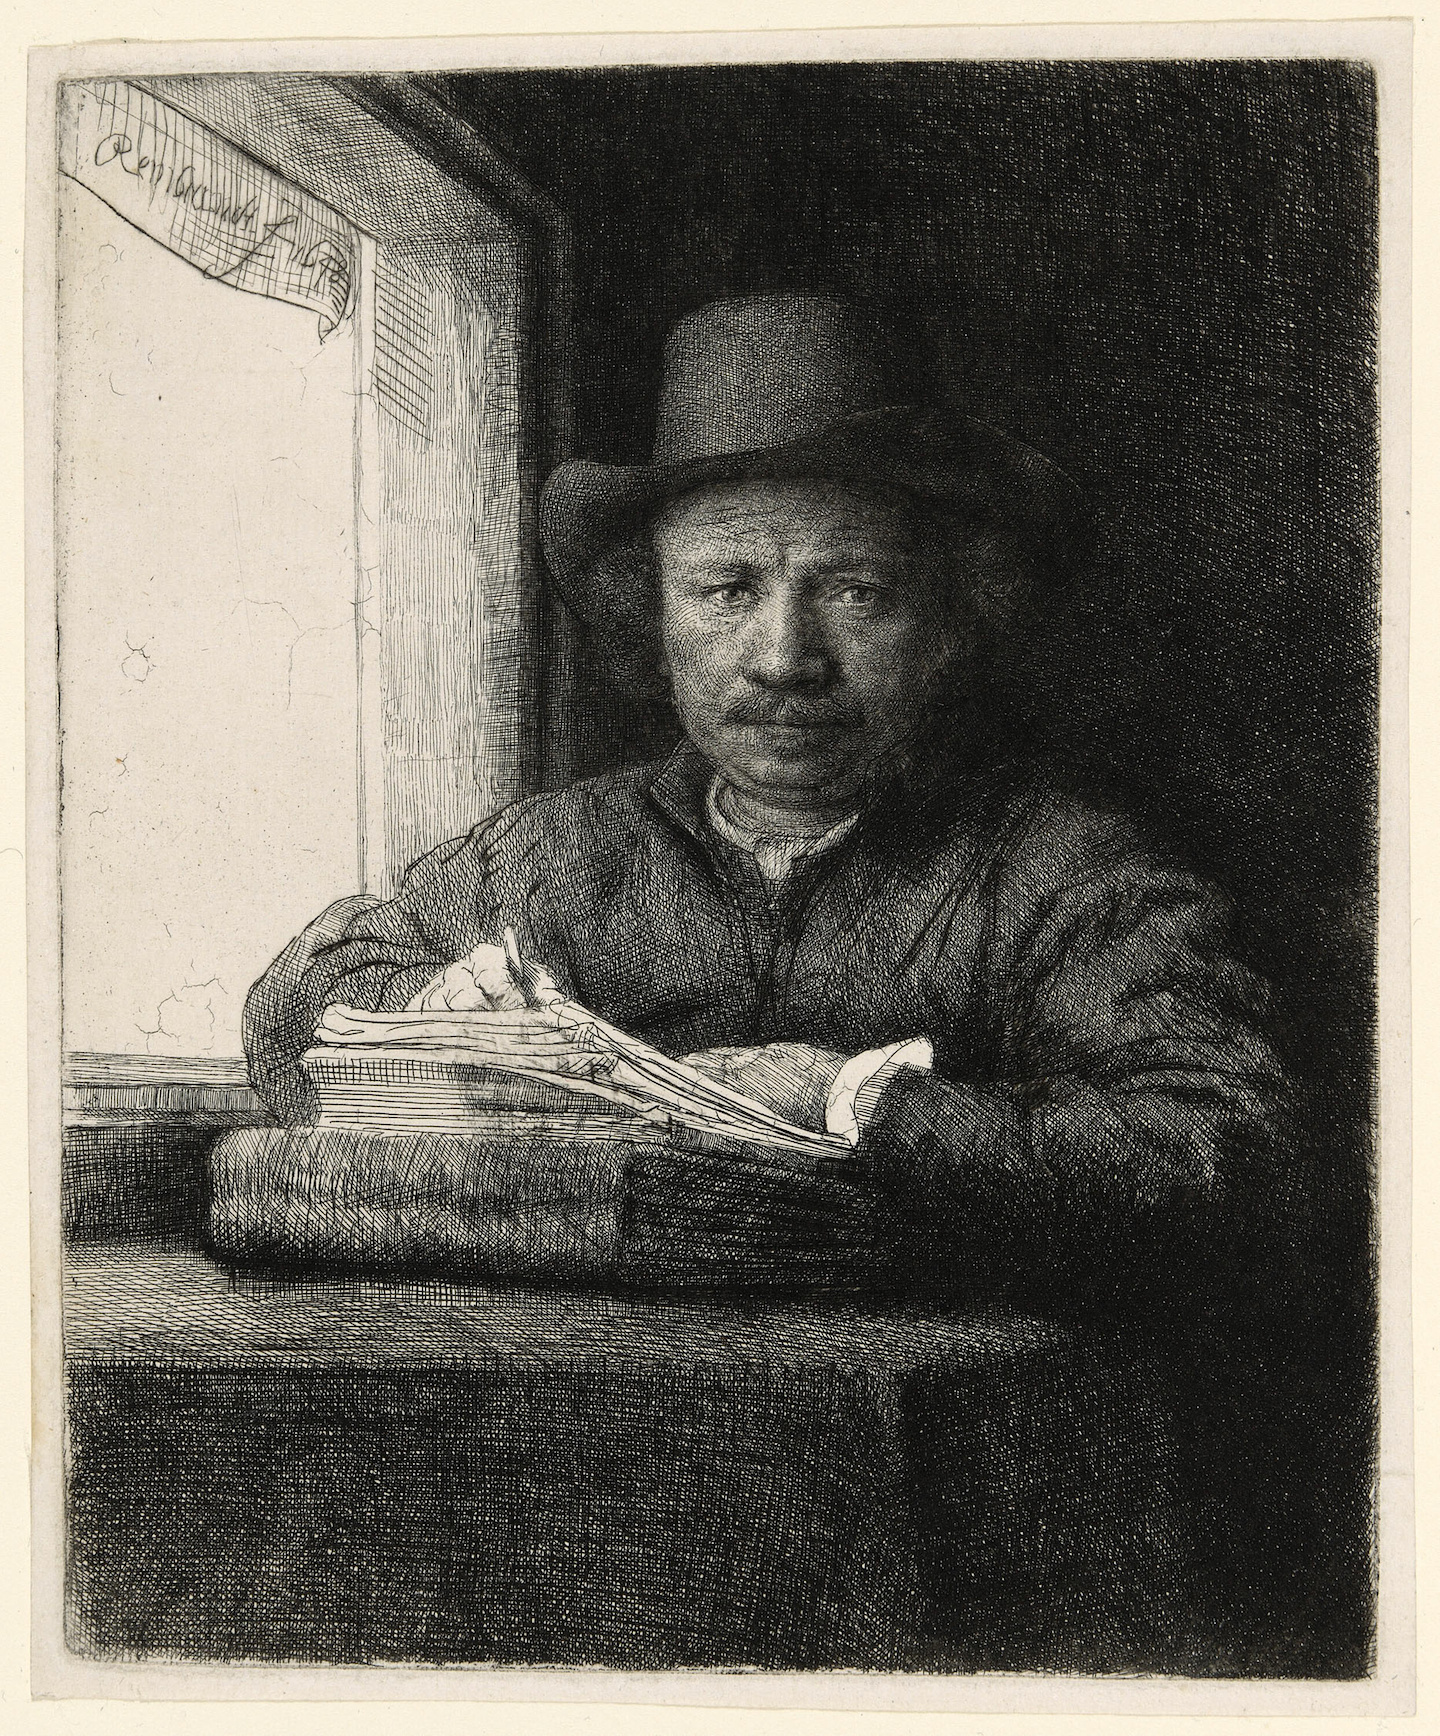 Rembrandt van Rijn, Self-Portrait Drawing at a Window, 1648, etching, drypoint and burin on ivory laid paper, 15.6 x 13 cm (Art Institute of Chicago)